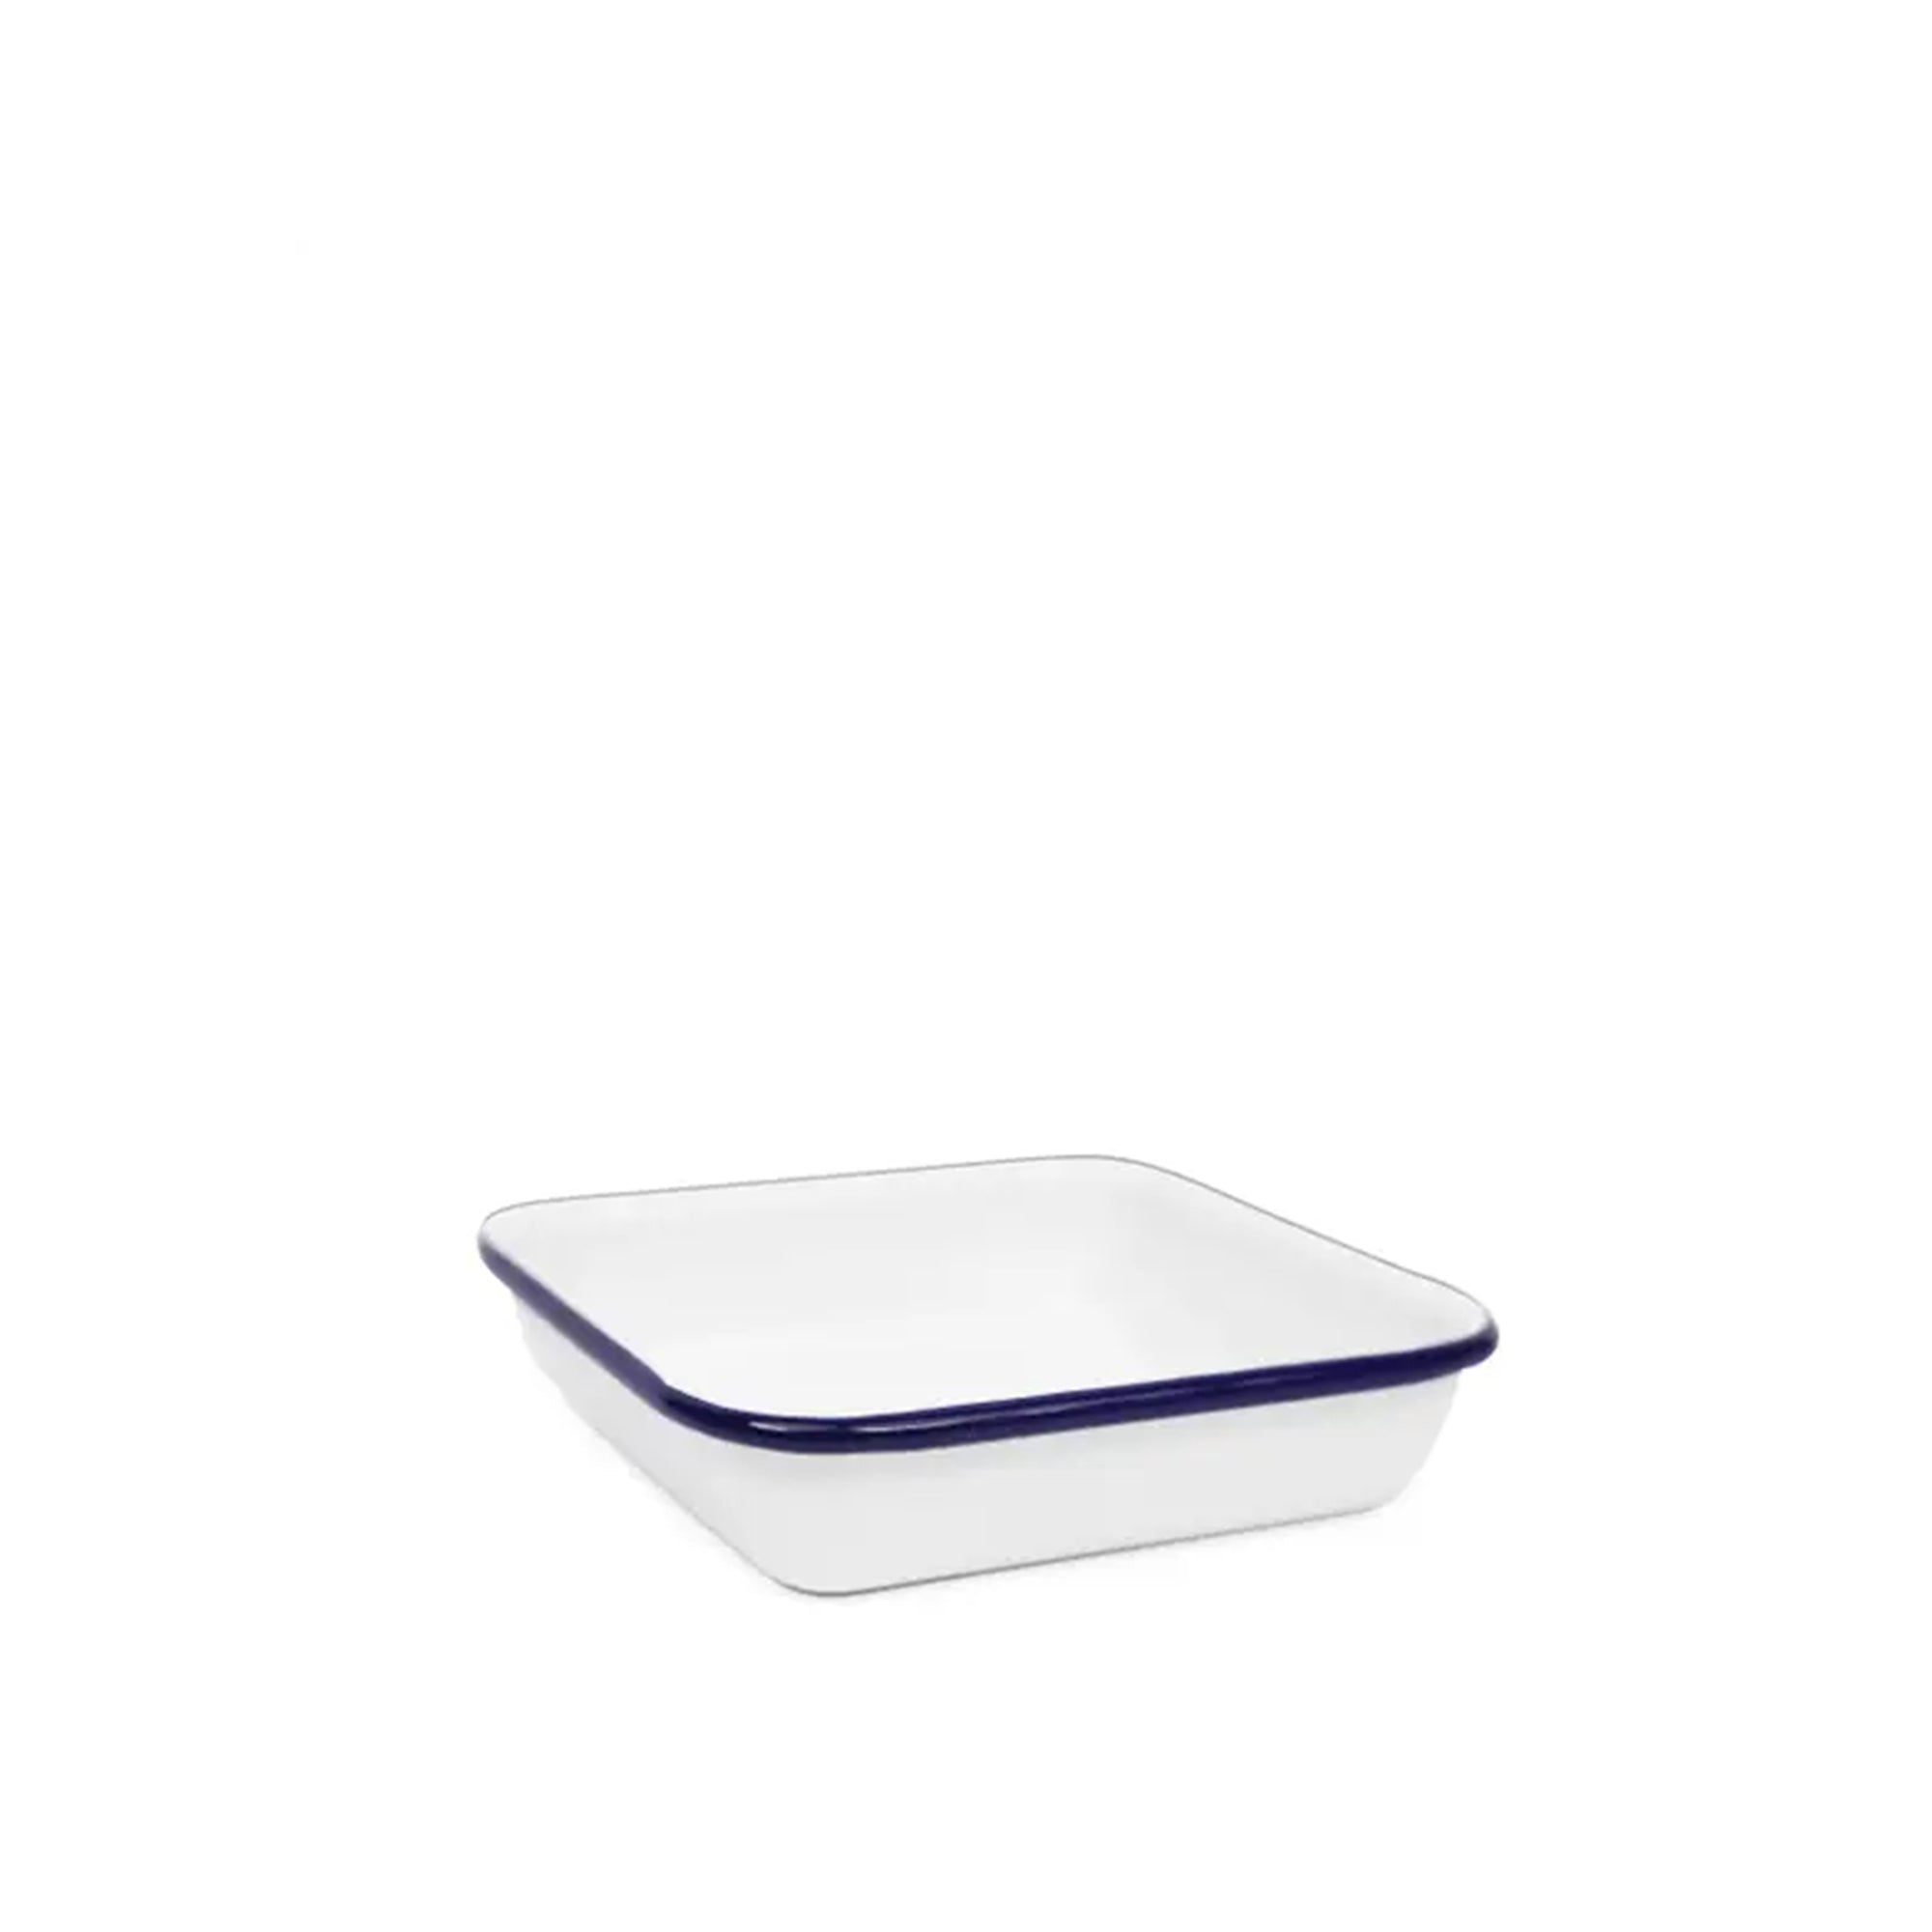 Vintage Enamelware Small Square Tray